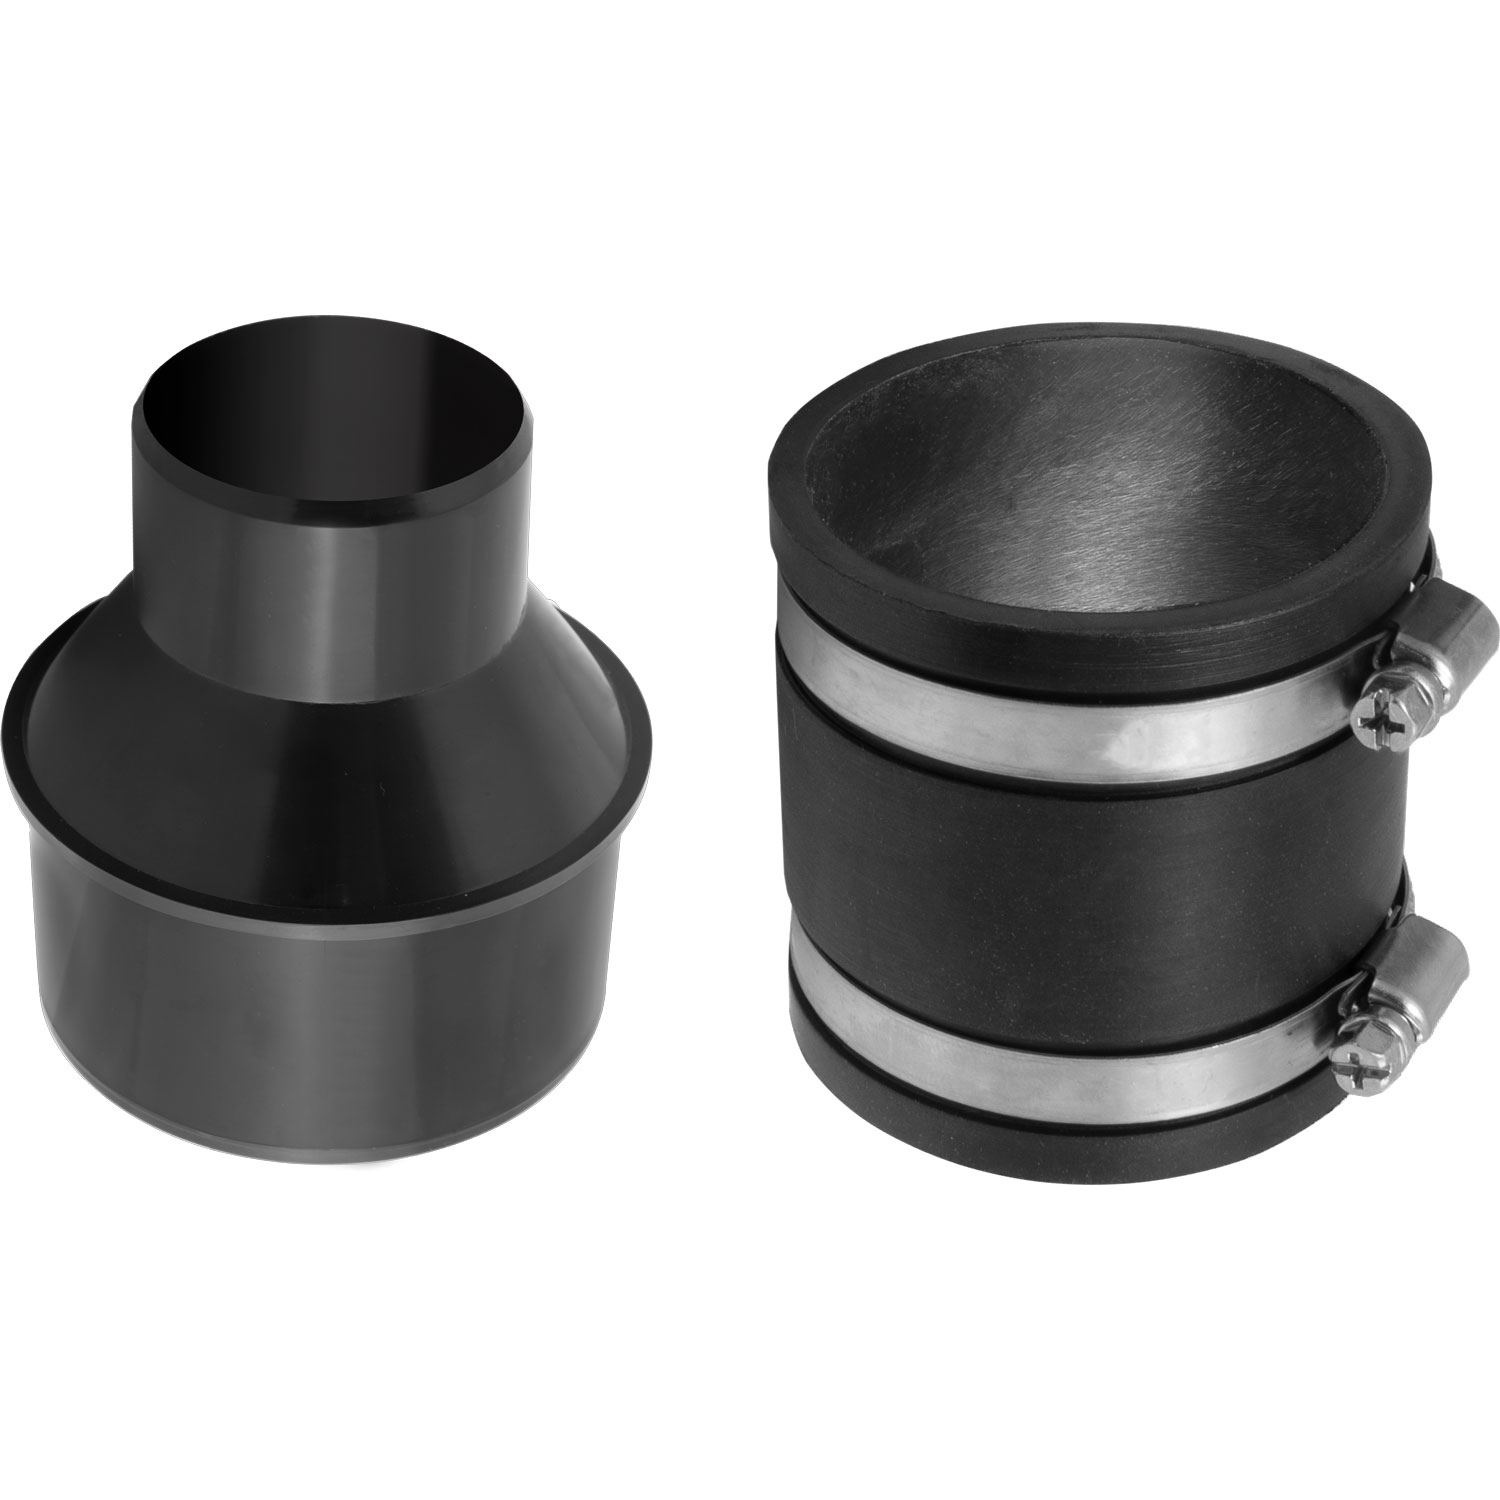 4 inch to 2-1/2 inch Reducer with 4 inch Flexible Cuff Rubber Coupler Fitting and Stainless Steel Hose Clamps for Dust Collection